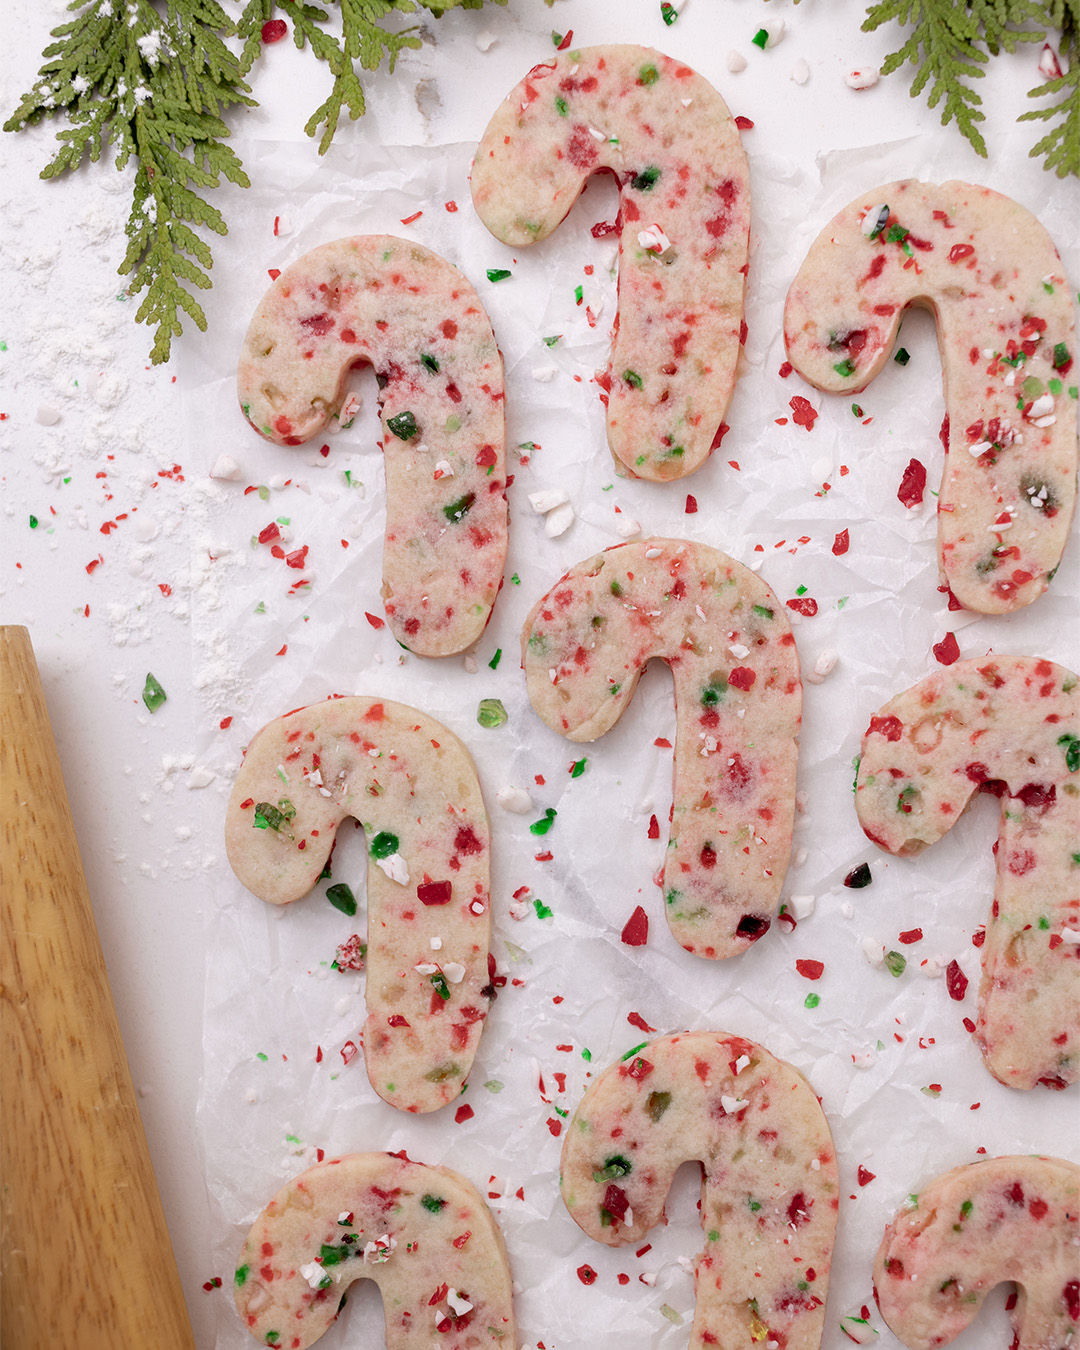 Candy cane shortbread cookies.